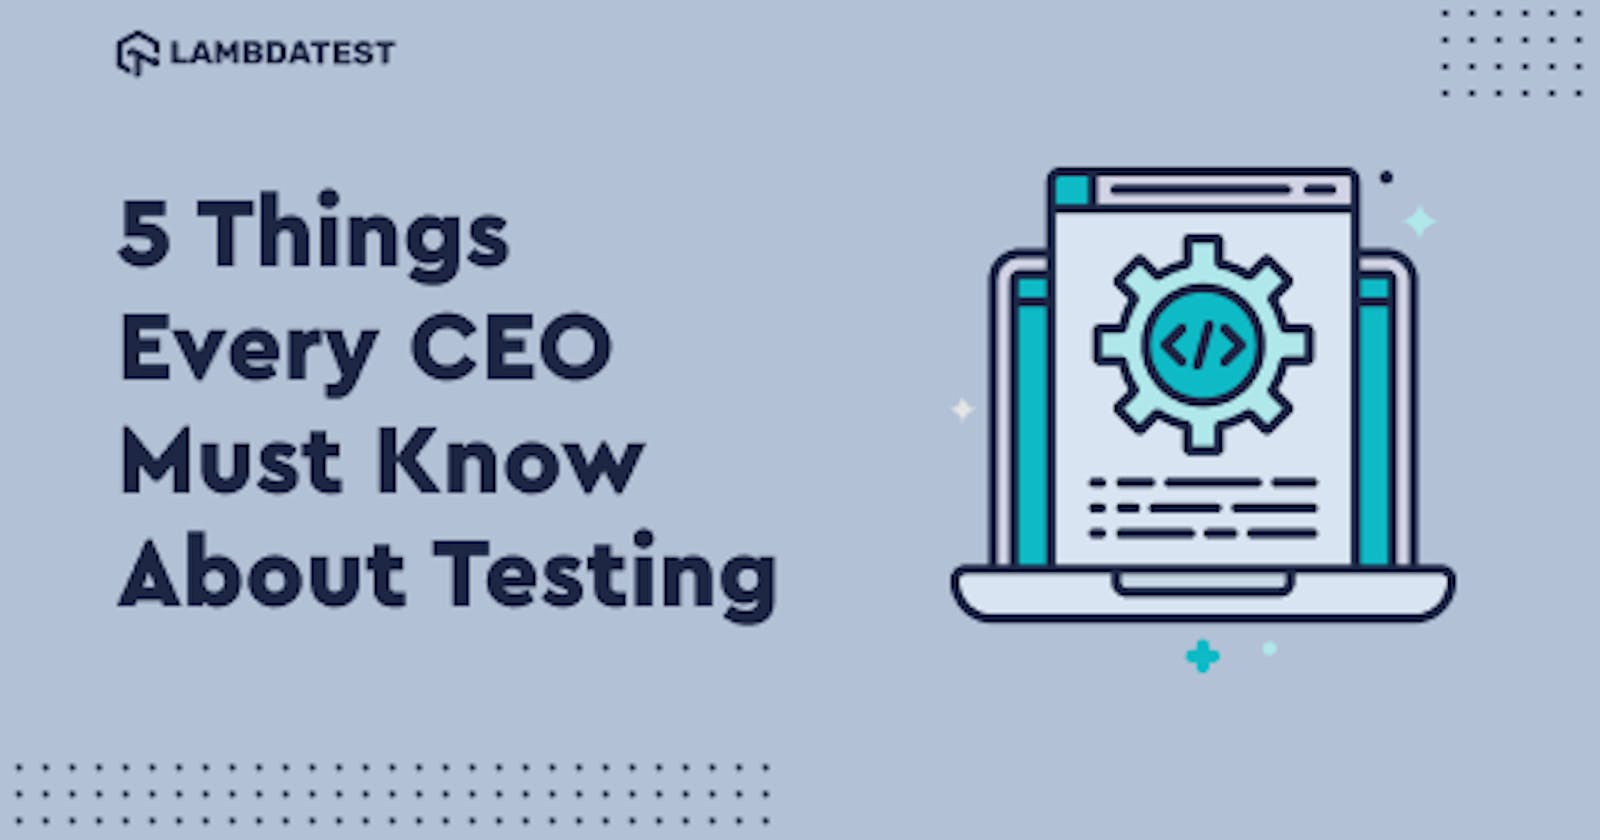 5 Things Every CEO Must Know About Testing